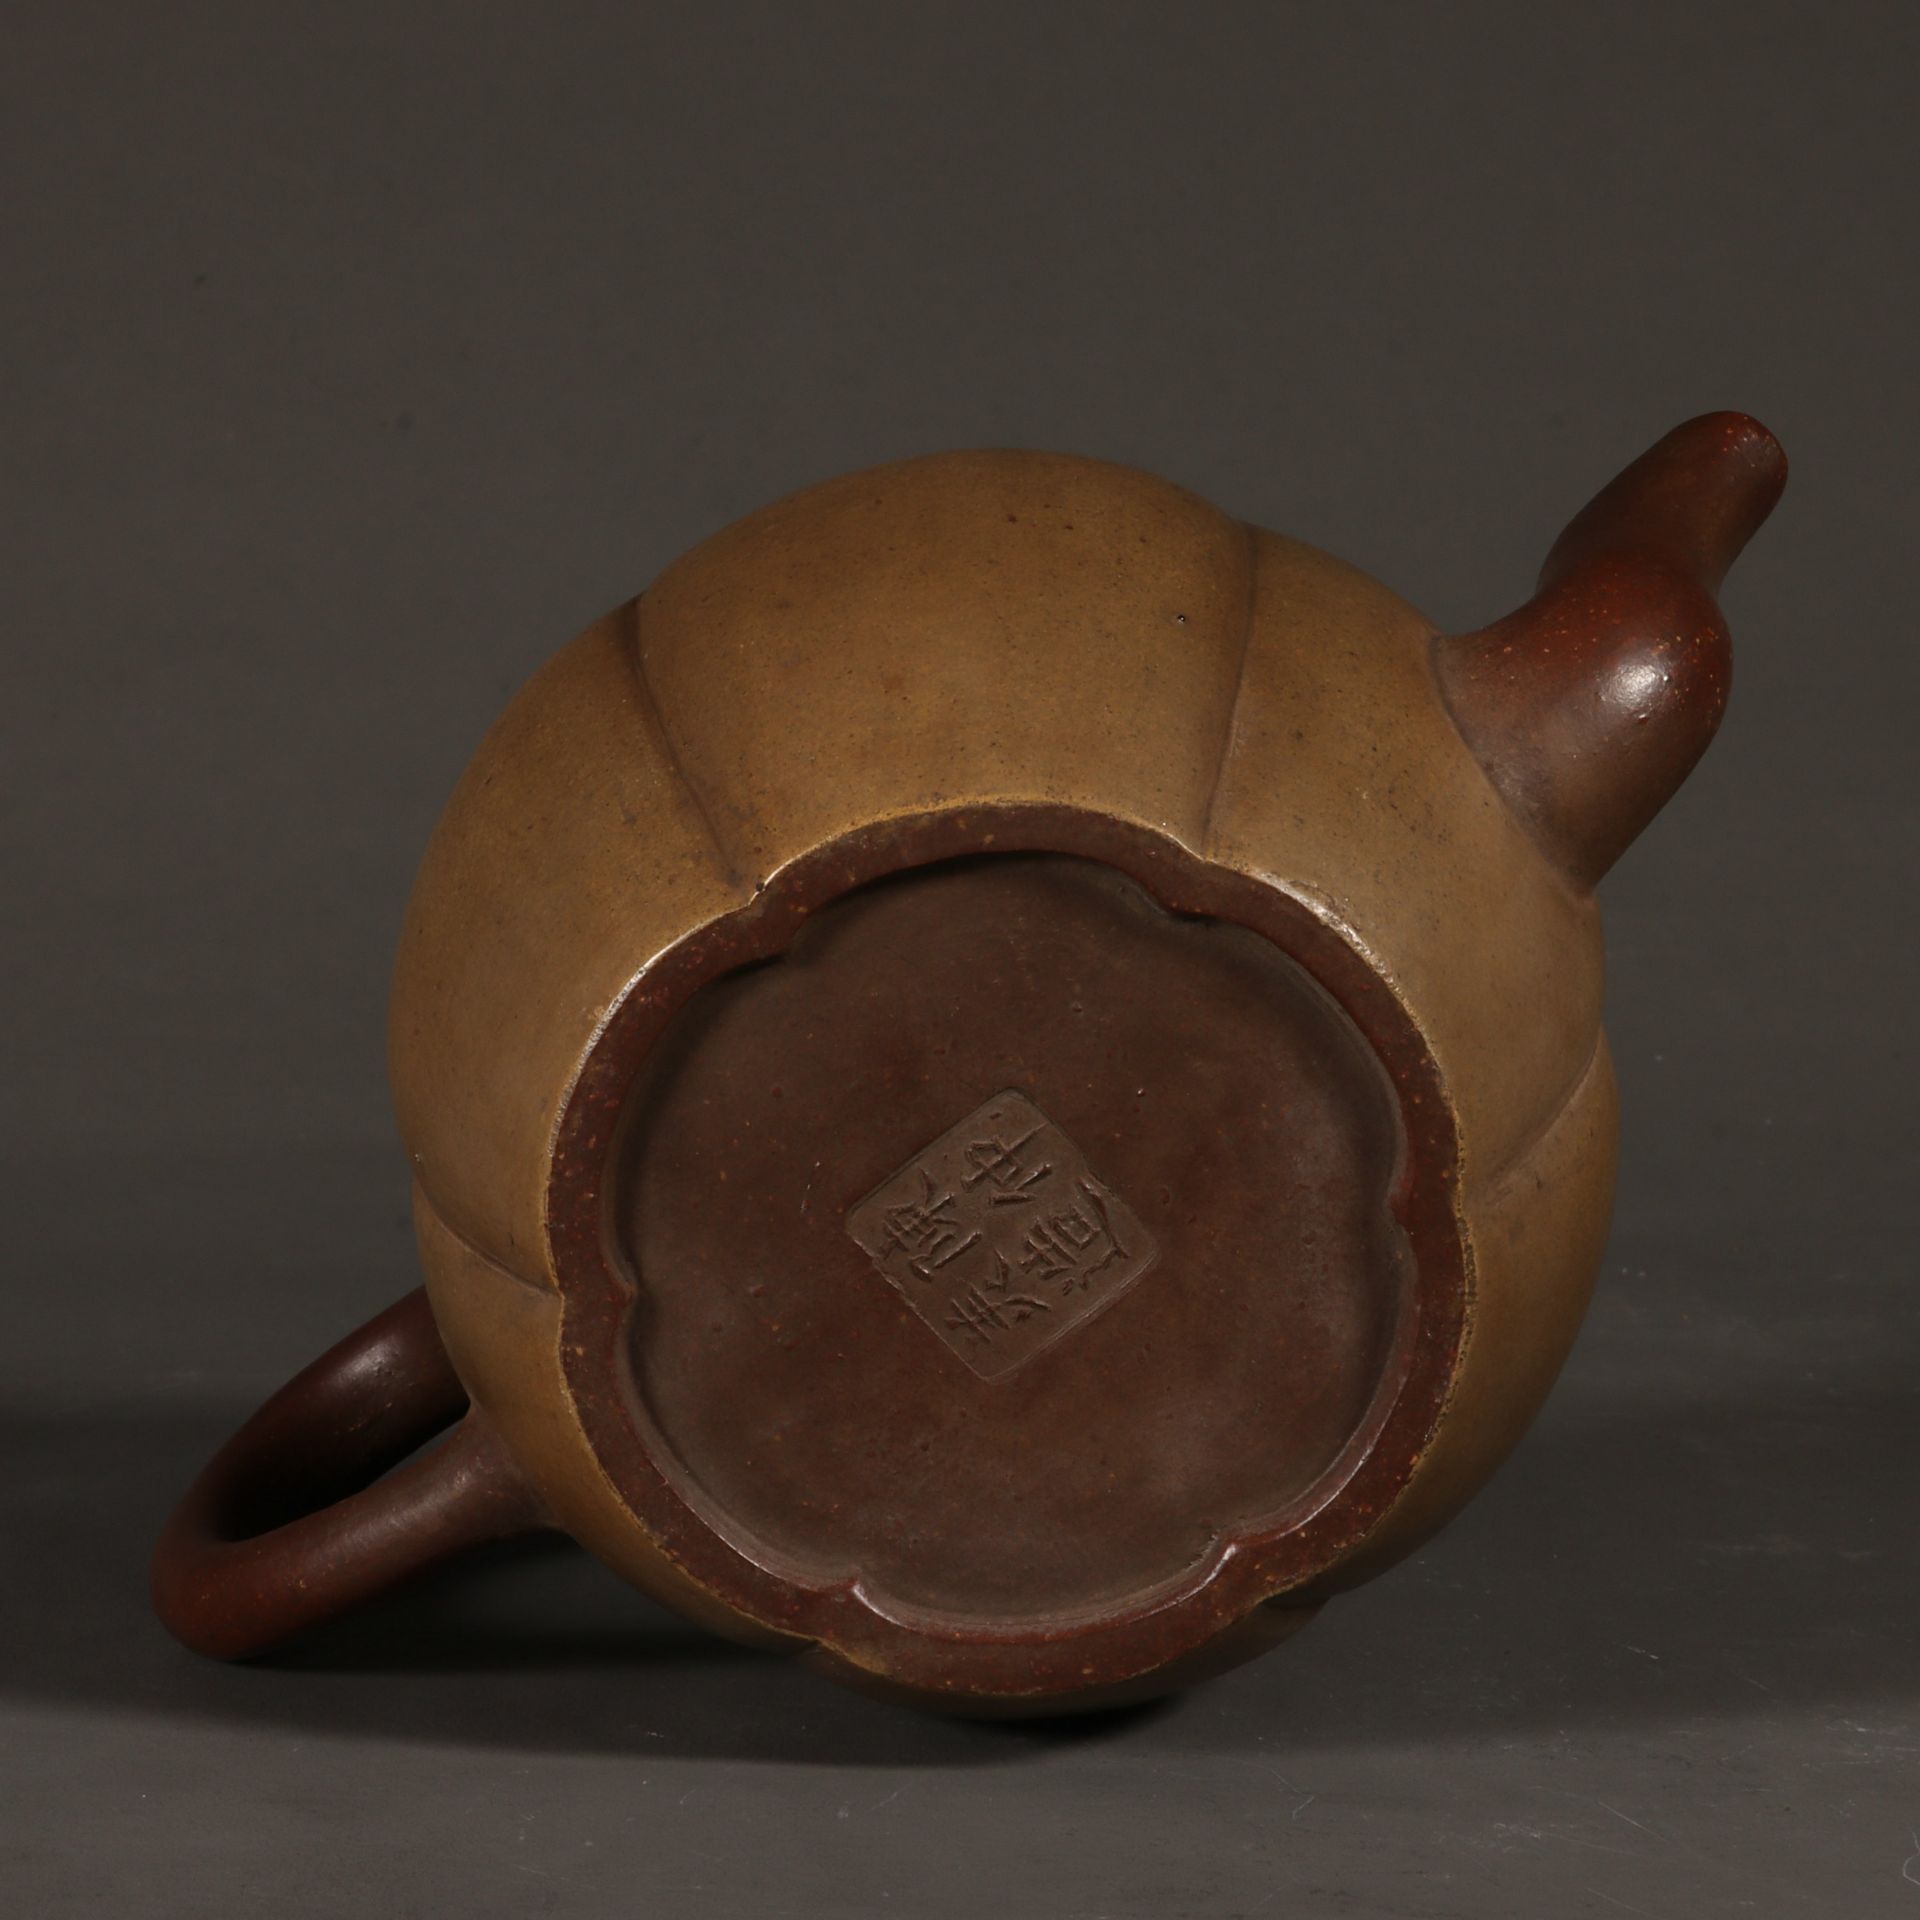 Purple clay pot from the Qing Dynasty - Image 9 of 9